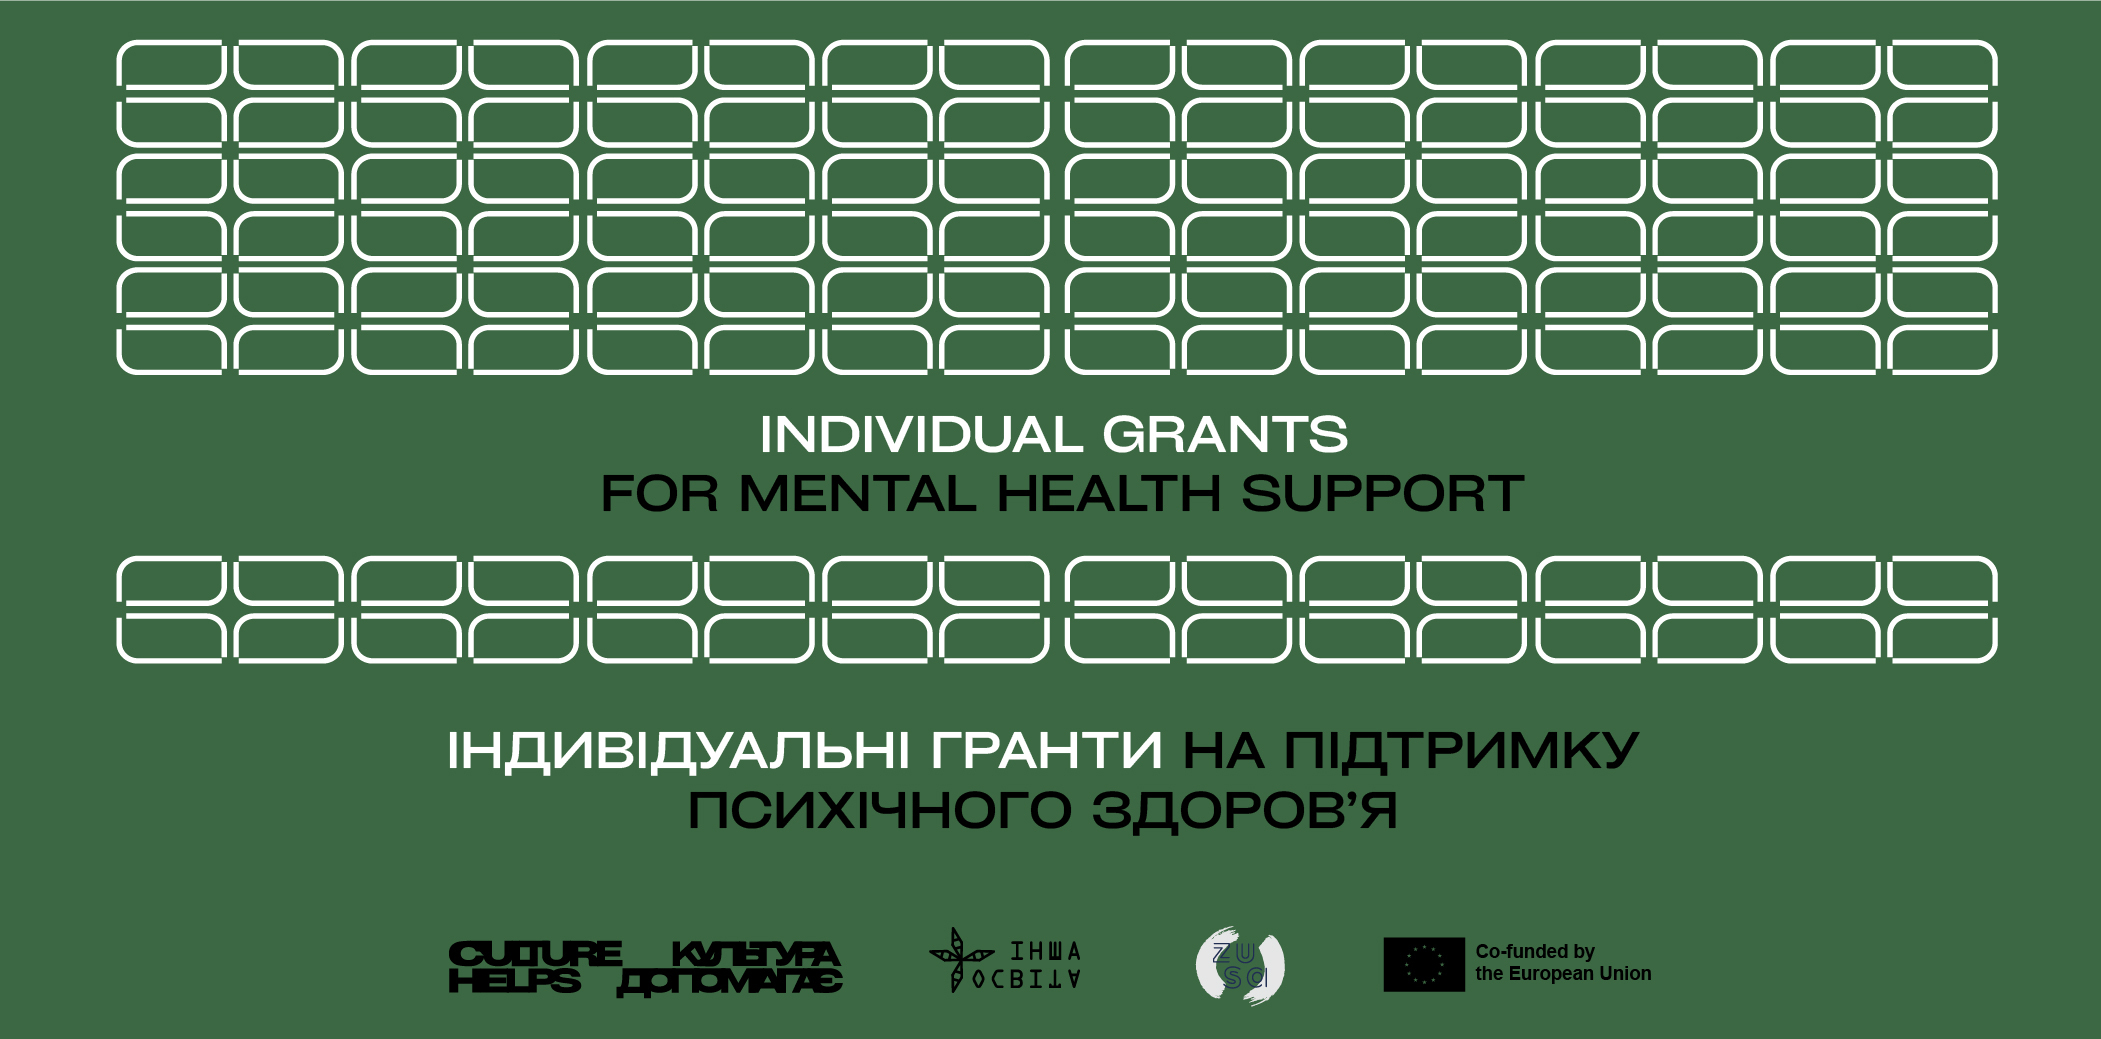 “Culture Helps / Культура допомагає”: Individual grants for mental health support up to 1000 EUR